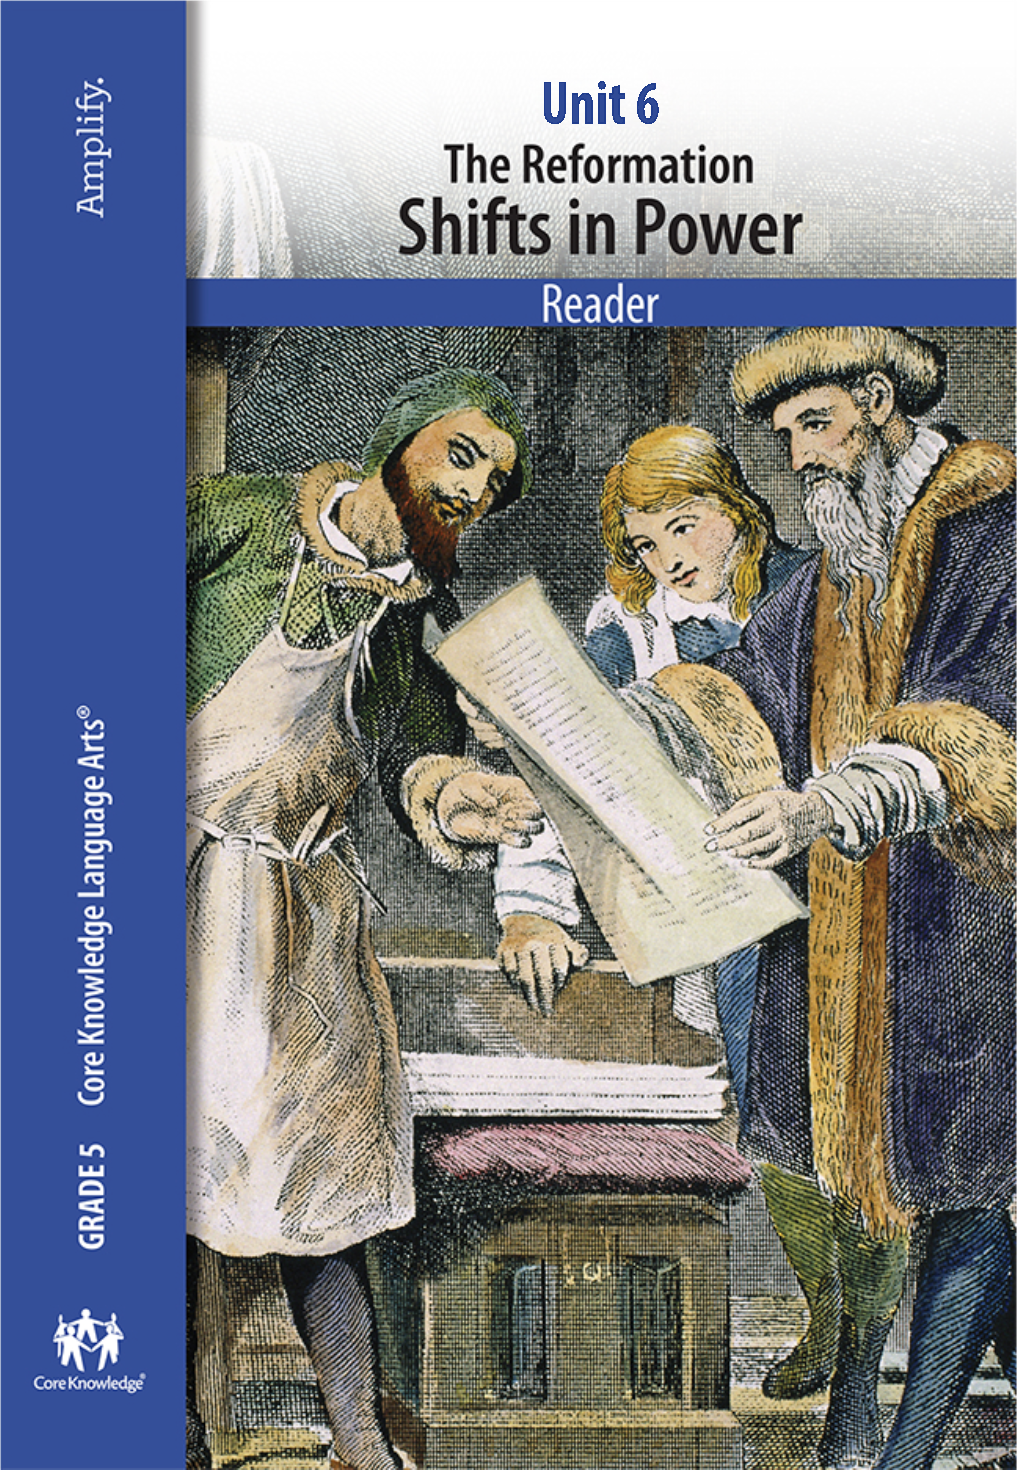 The Reformation Shifts in Power Reader